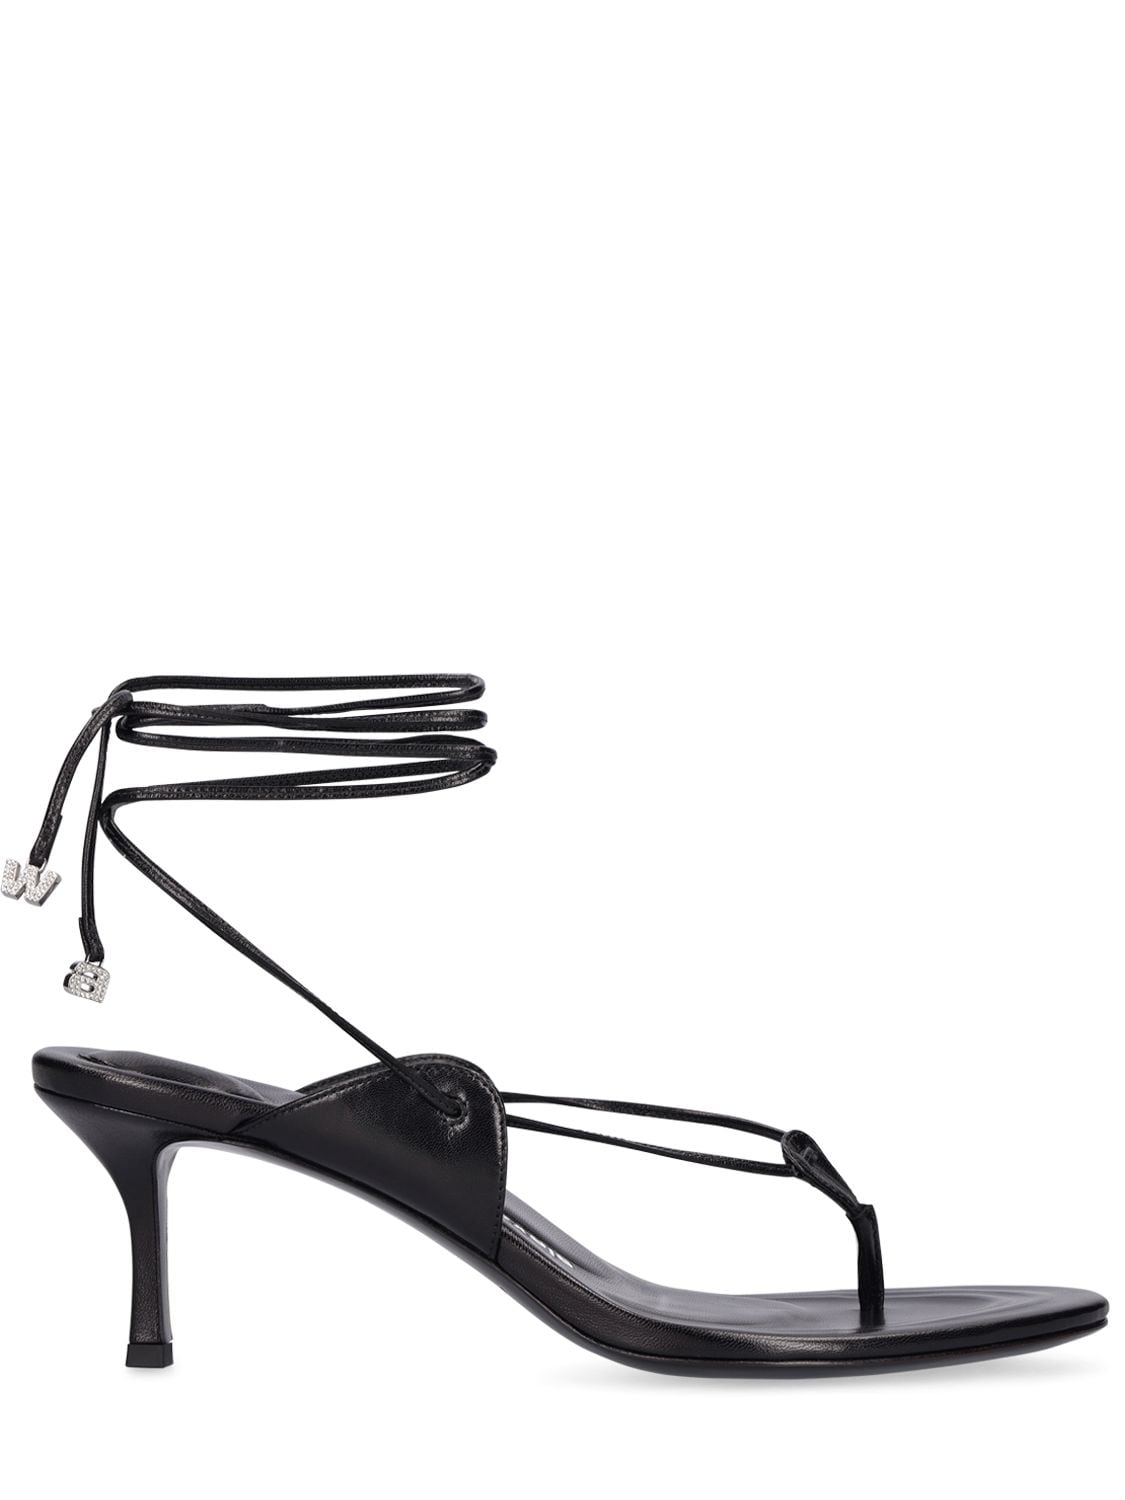 ALEXANDER WANG 65MM LUCIENNE LEATHER THONG SANDALS